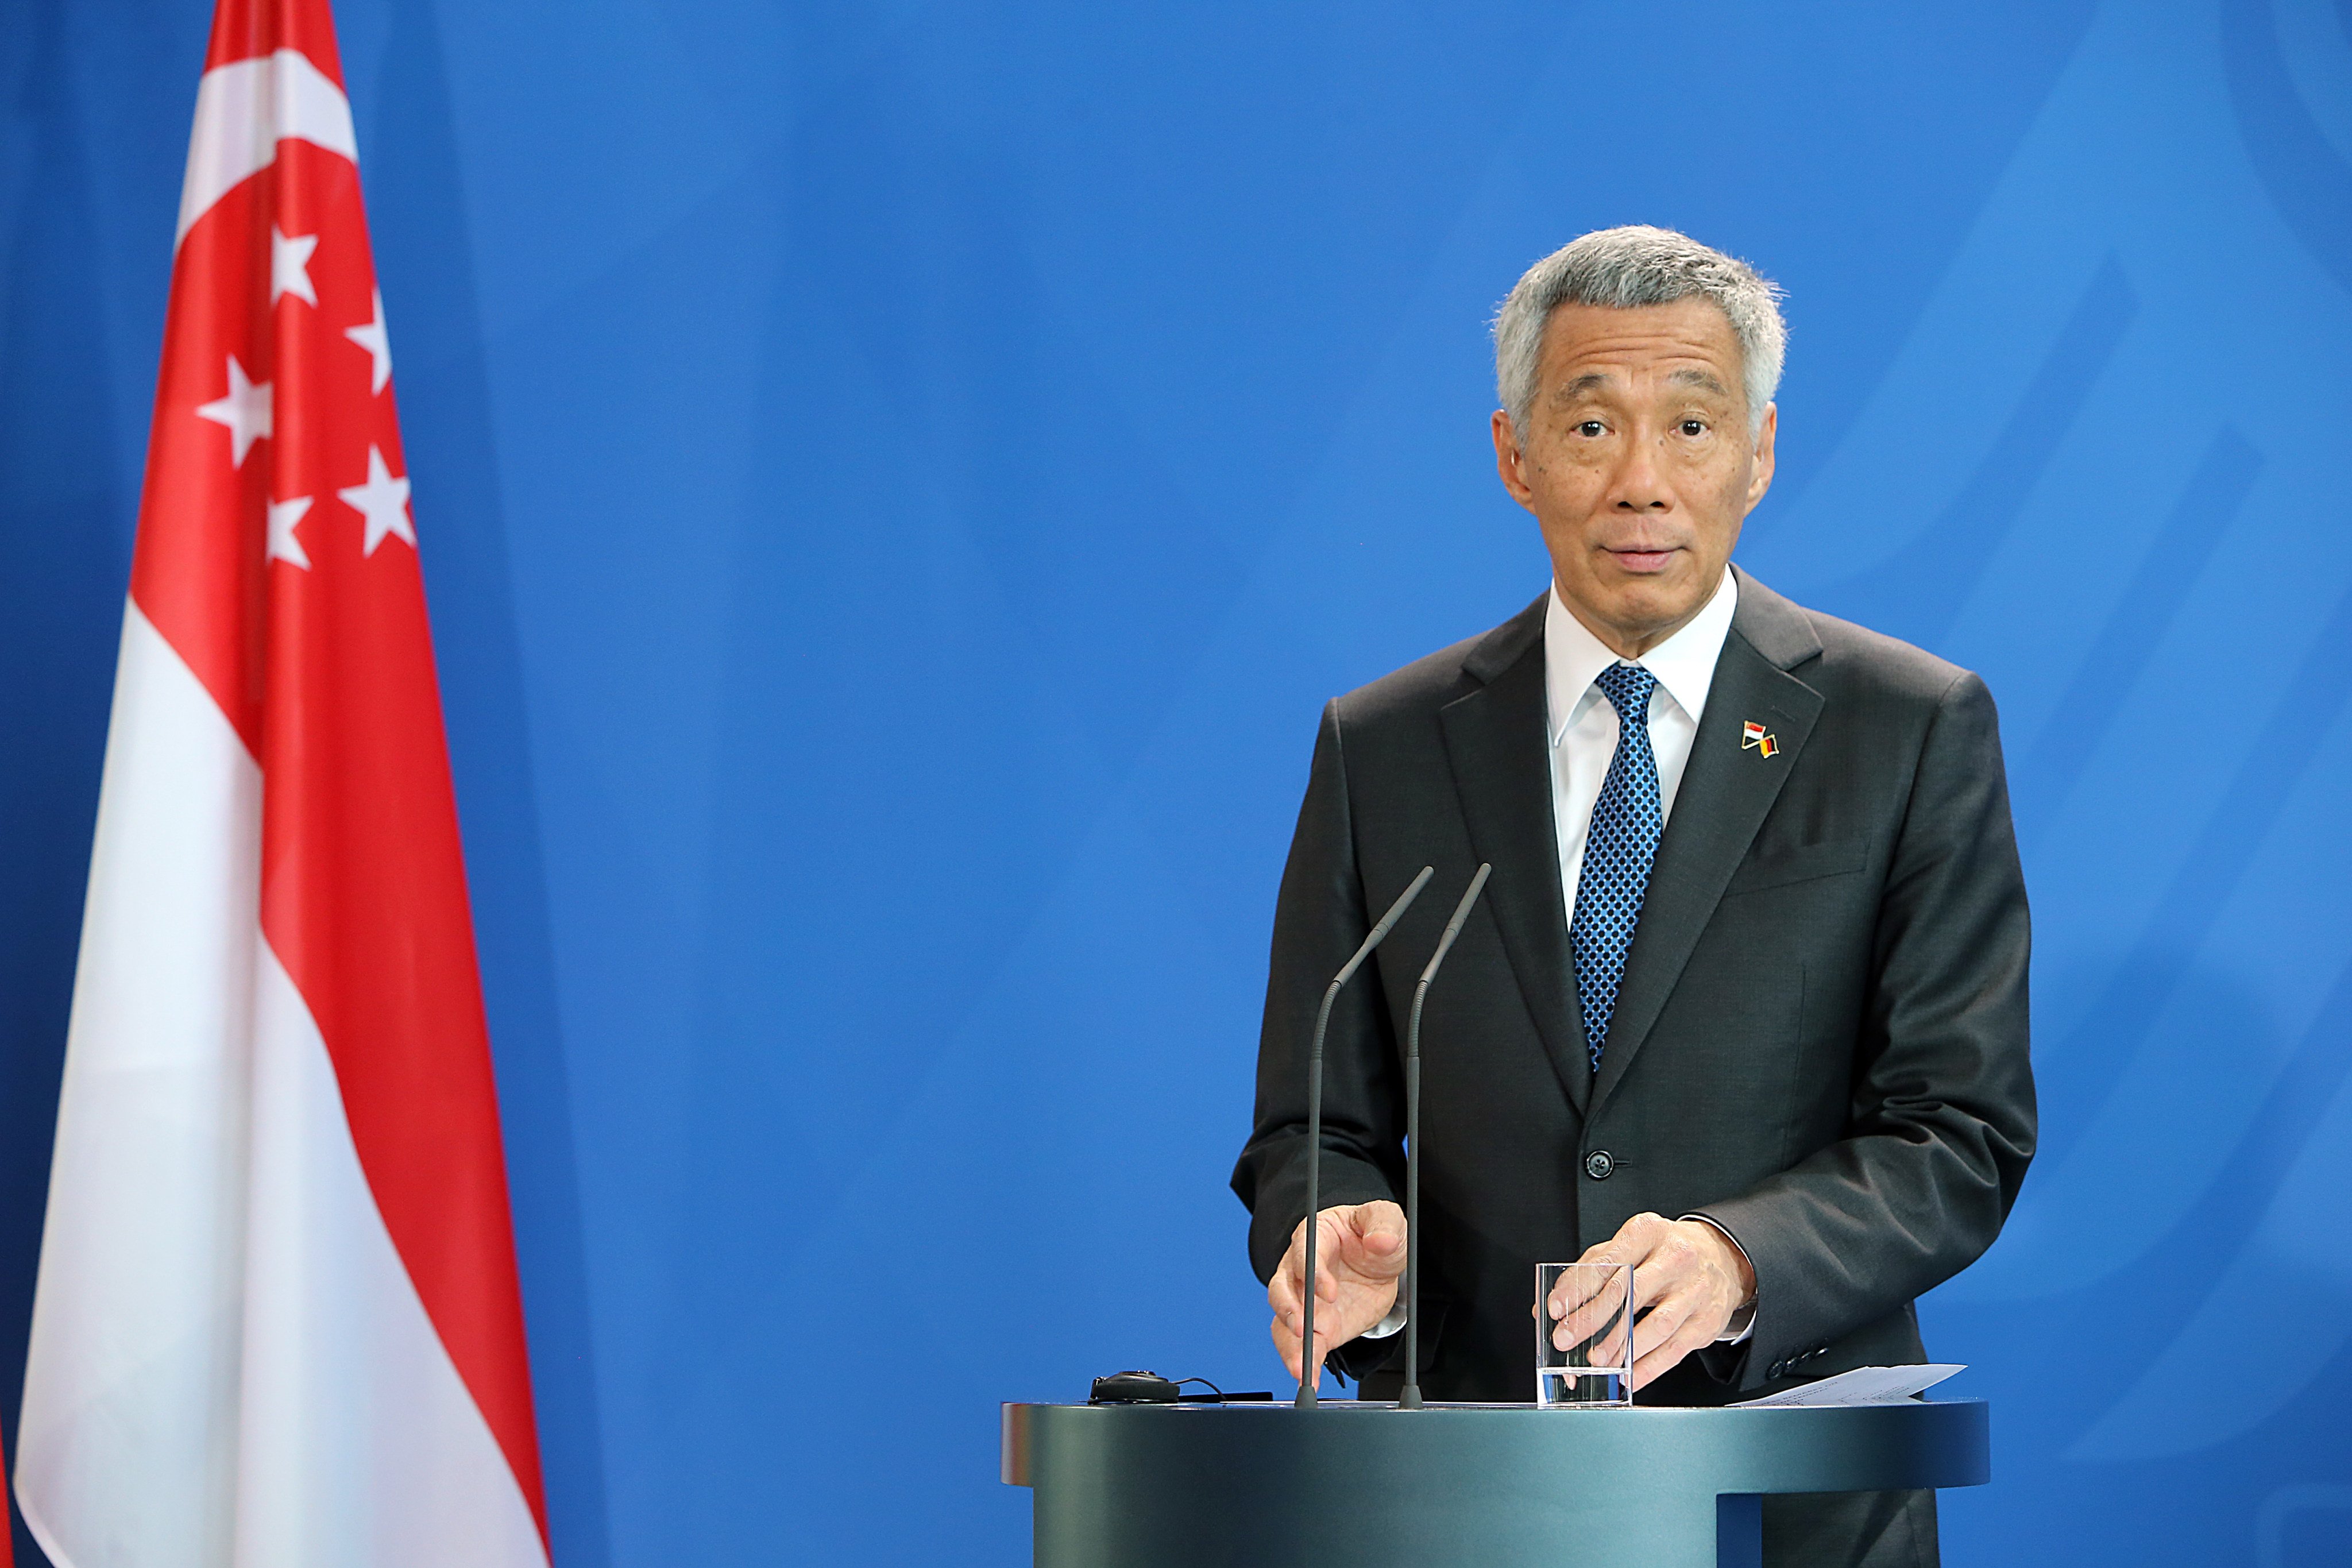 Singaporean Prime Minister Lee Hsien Loong gives a statement in Berlin. Photo: dpa